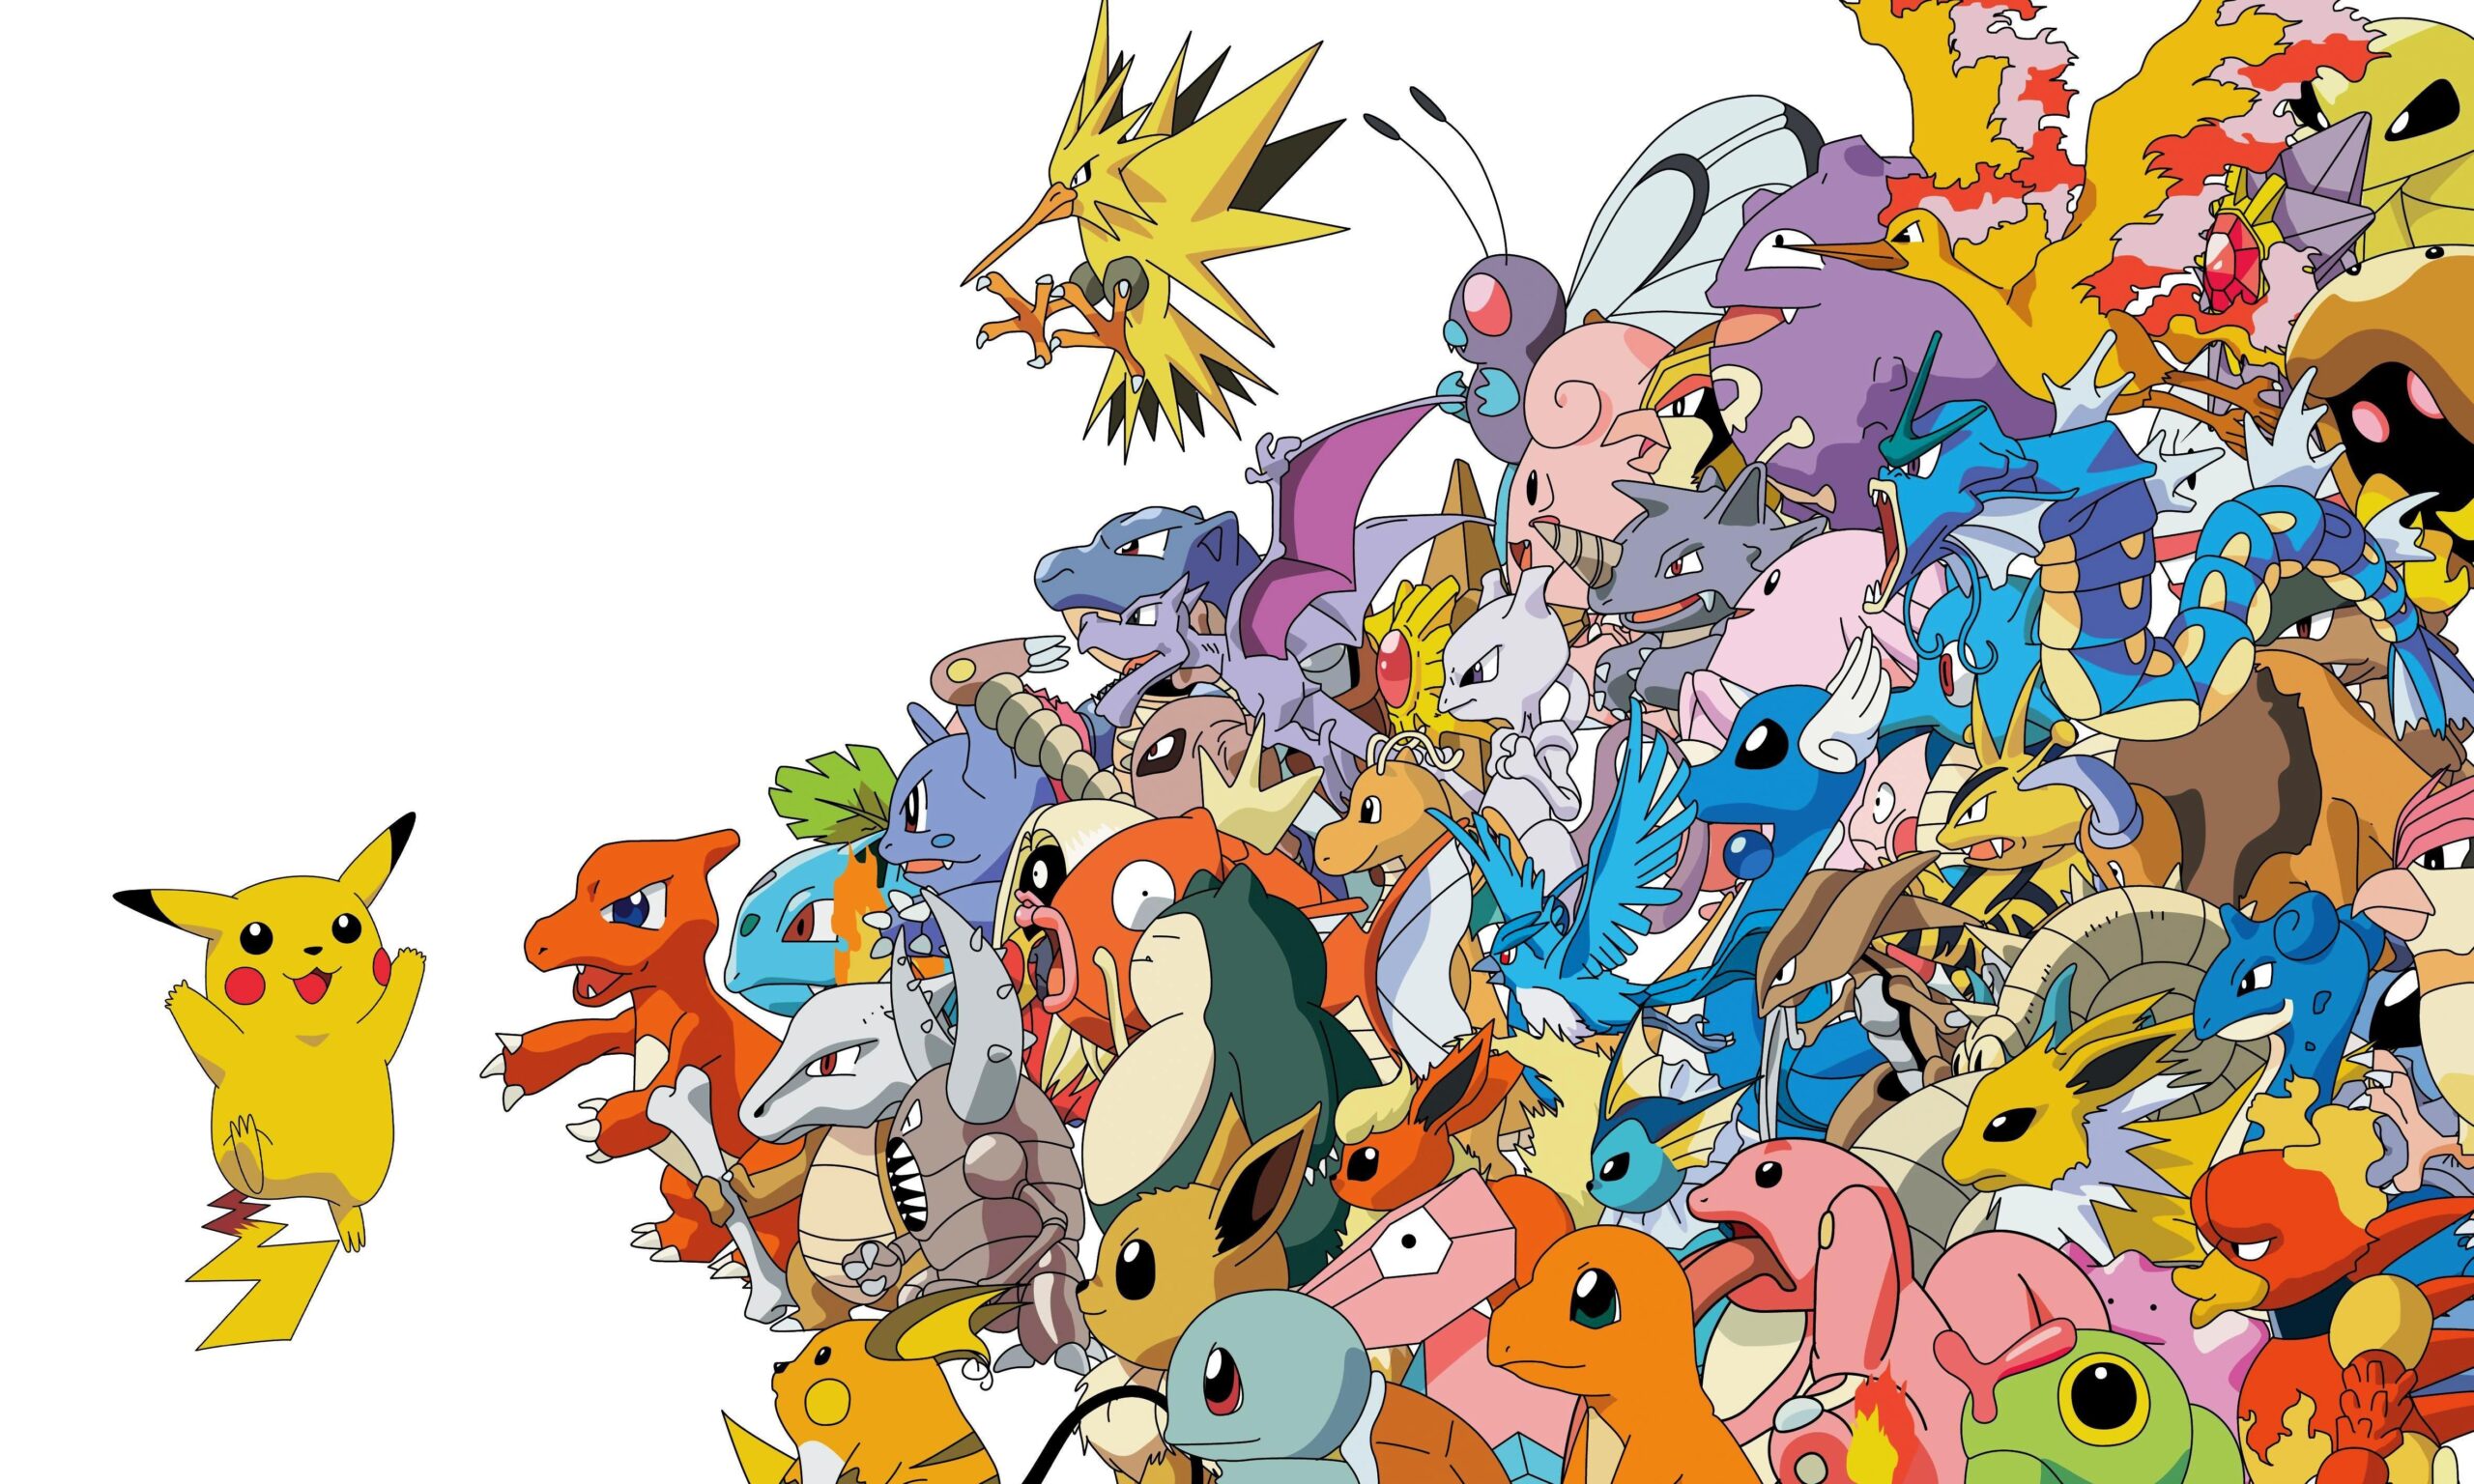 There are now officially 900 Pokémon in the National Pokédex VGC